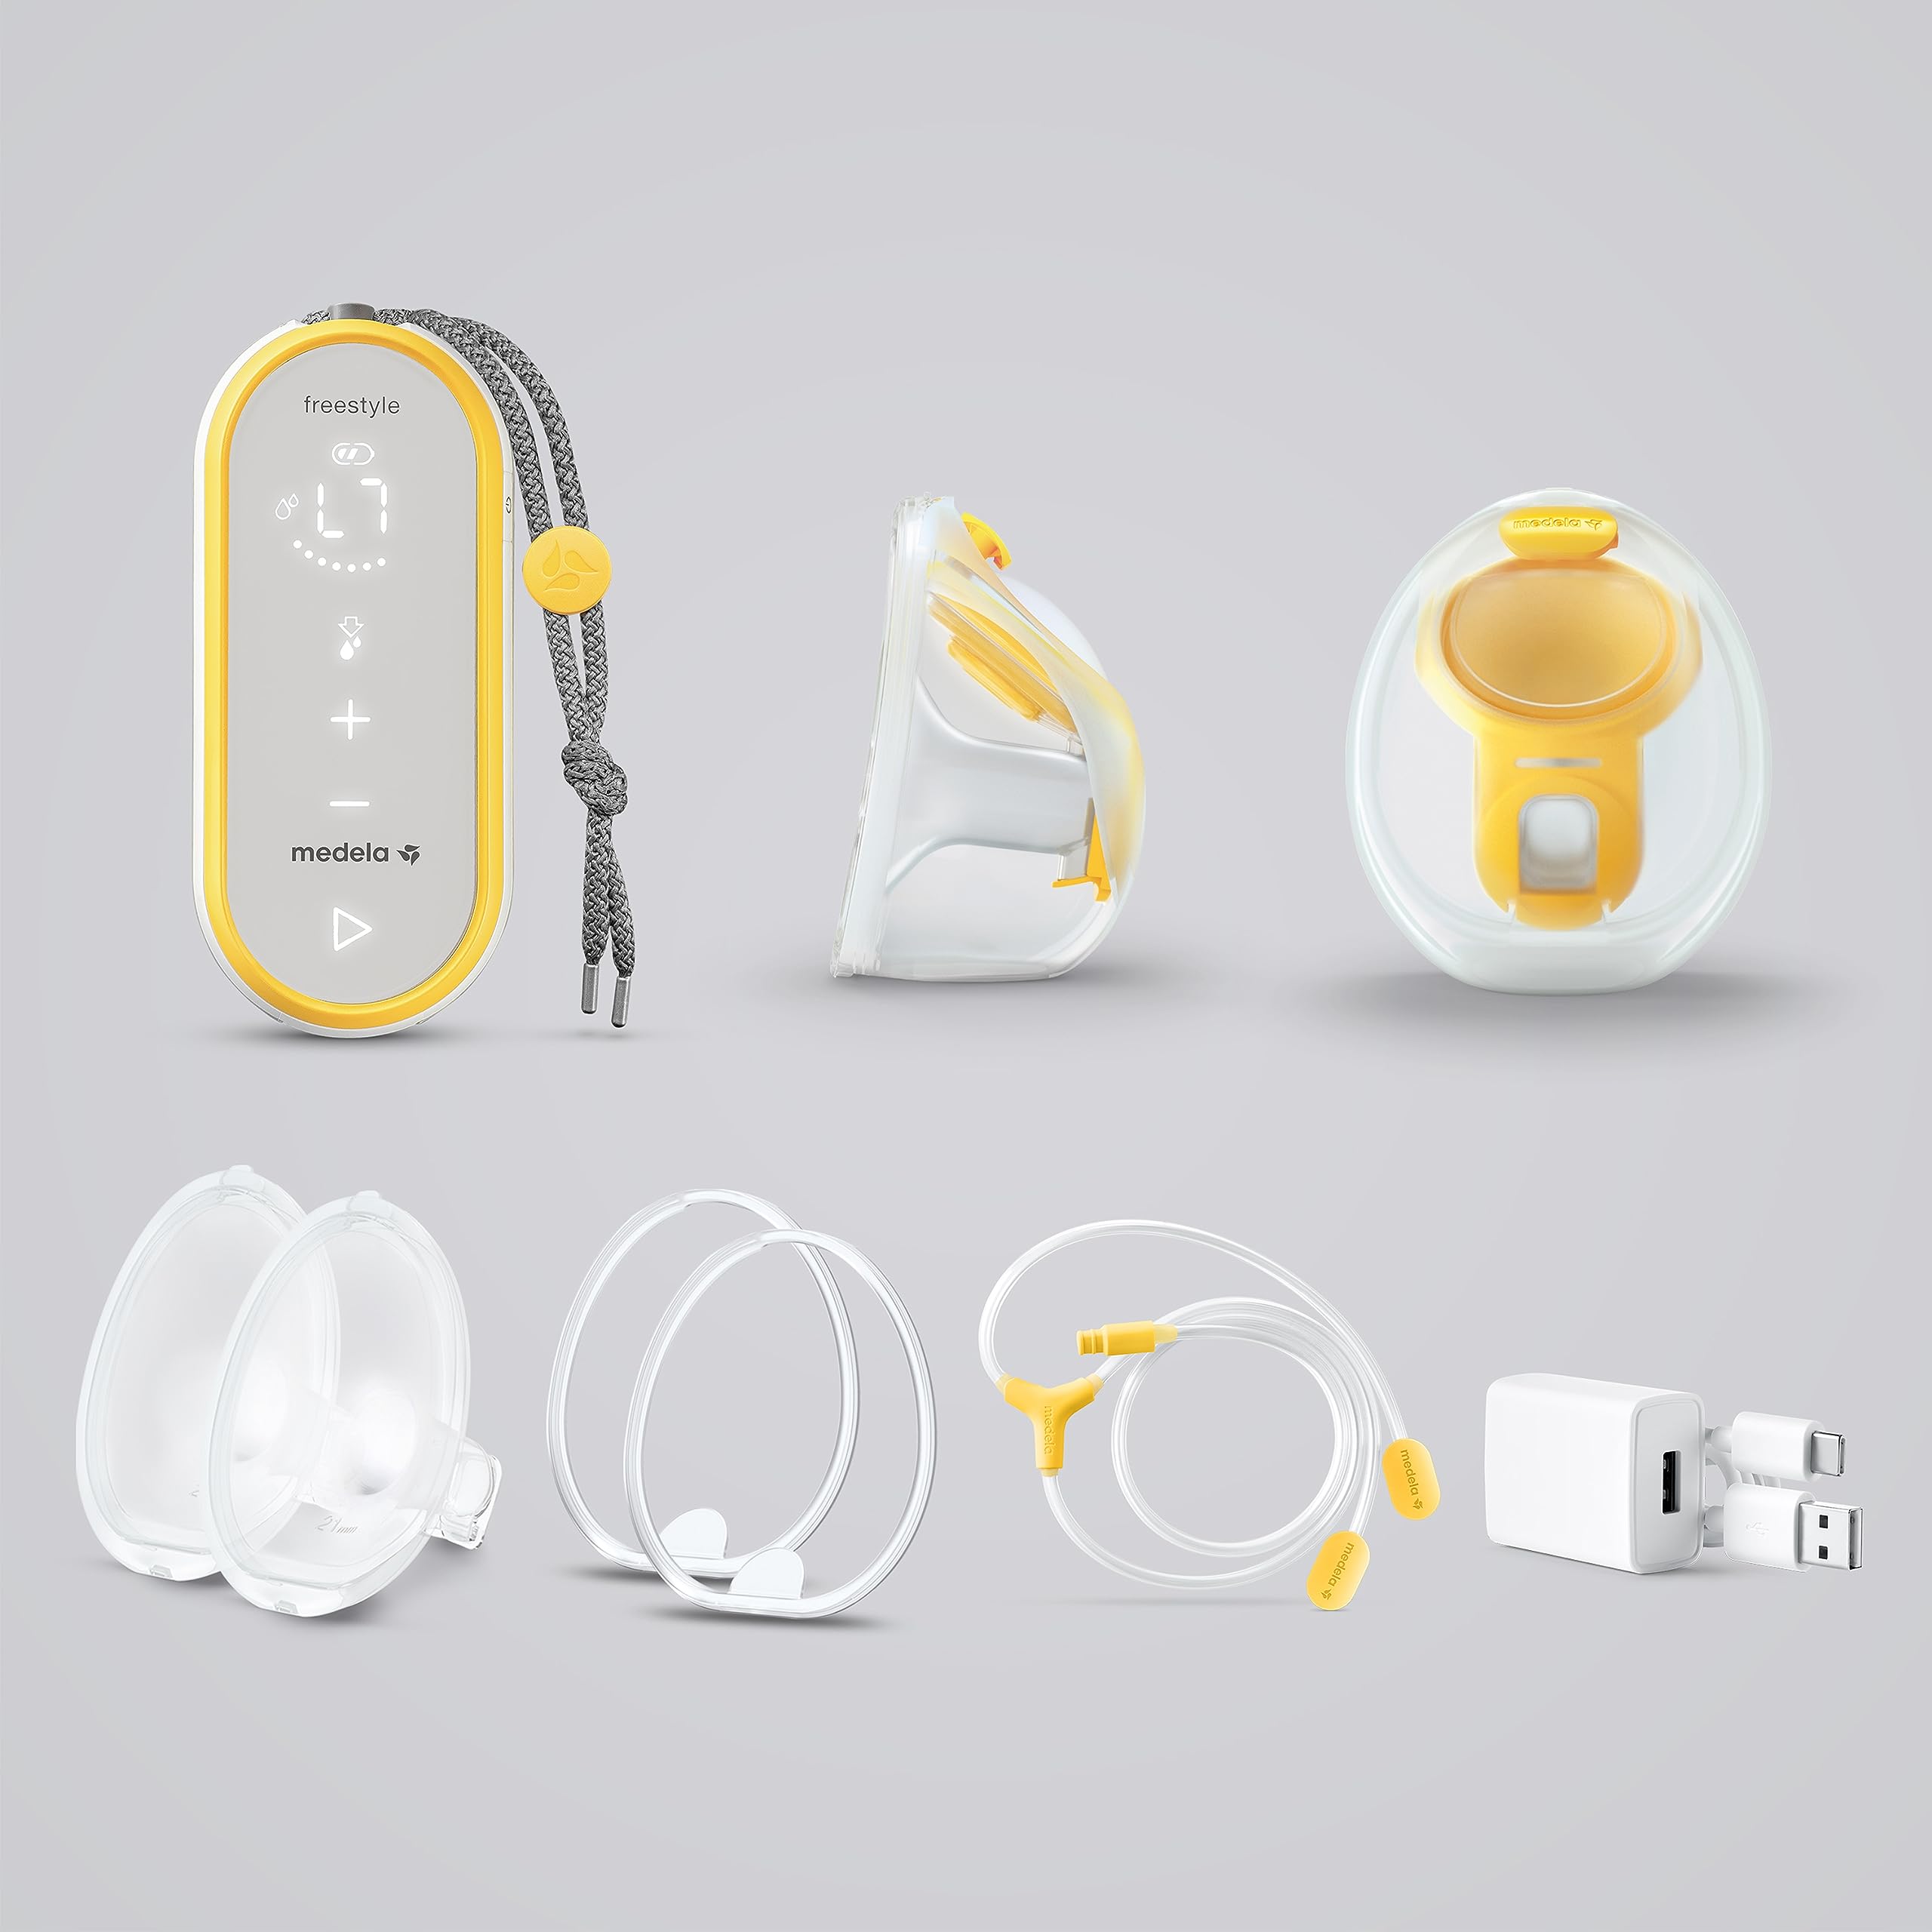 Medela Freestyle Hands-Free Breast Pump | Wearable & Soothing Gel Pads for Breastfeeding, 4 Count Pack, Tender Care HydroGel Reusable Pads